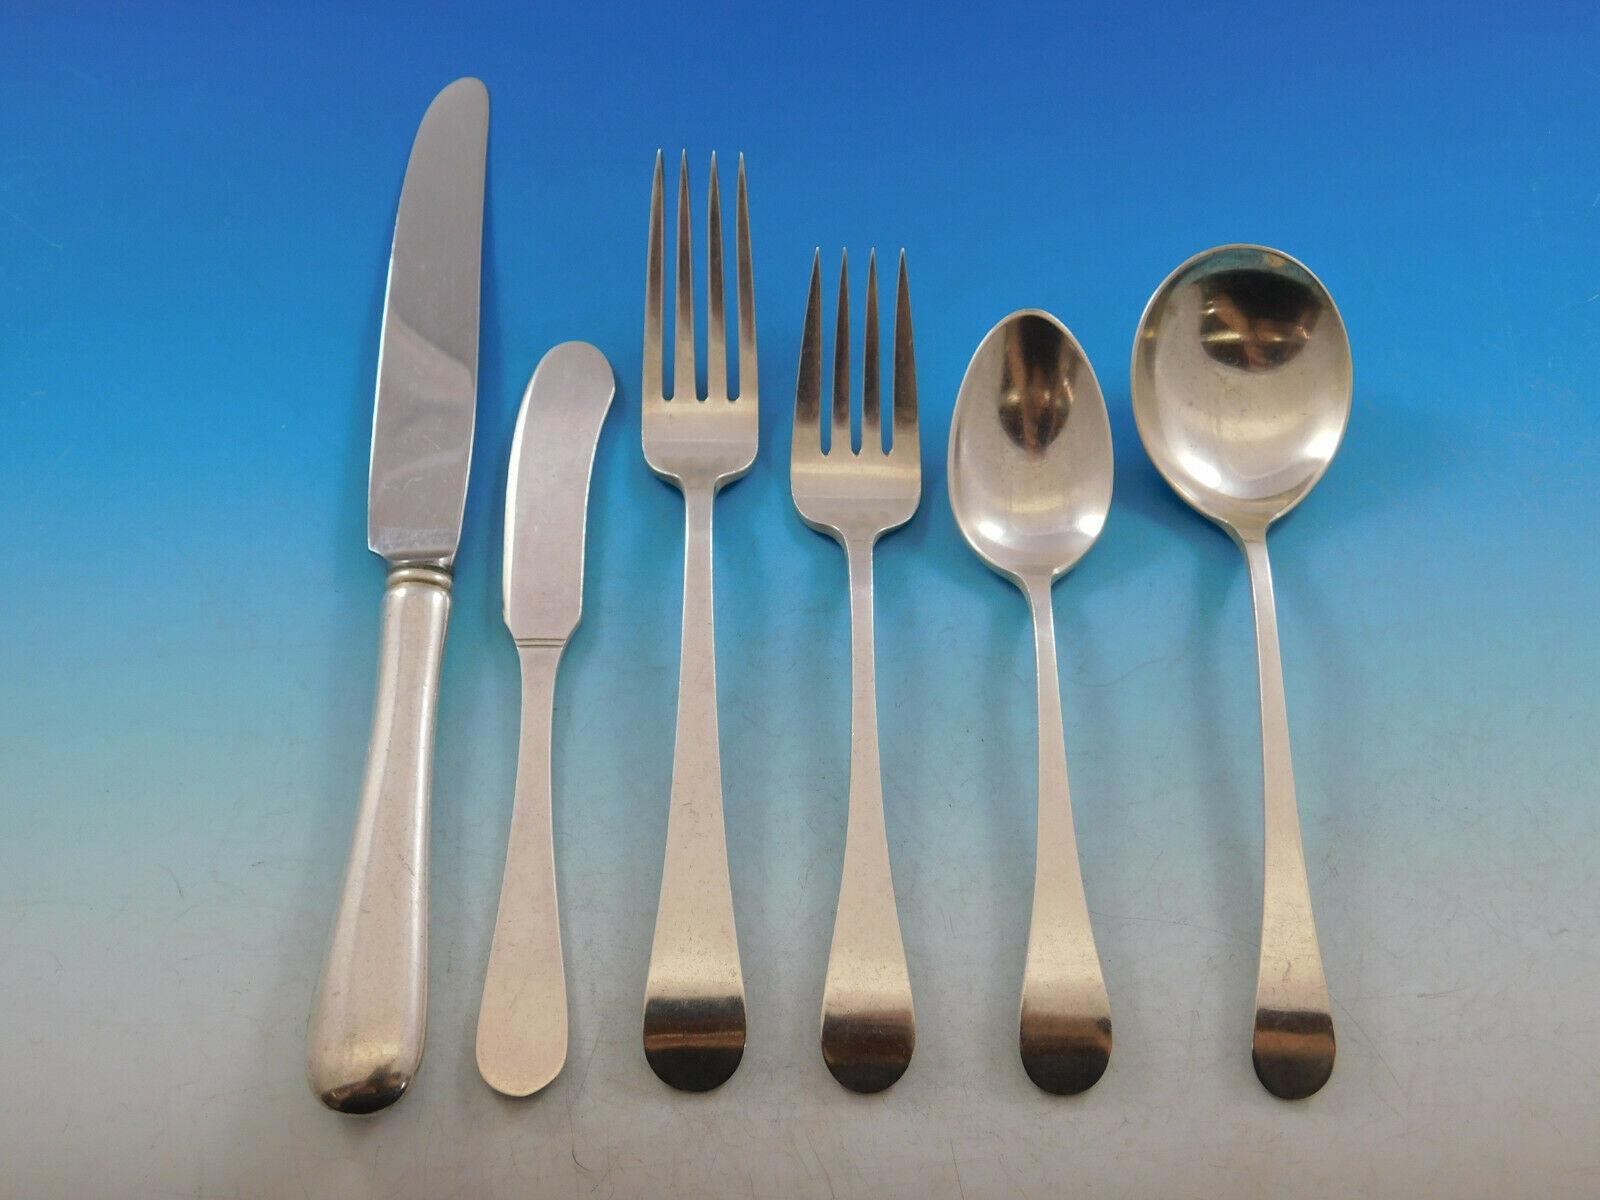 Desirable Hannah Hull by Tuttle sterling silver flatware set, 76 pieces. This set includes:

12 knives, 8 3/4